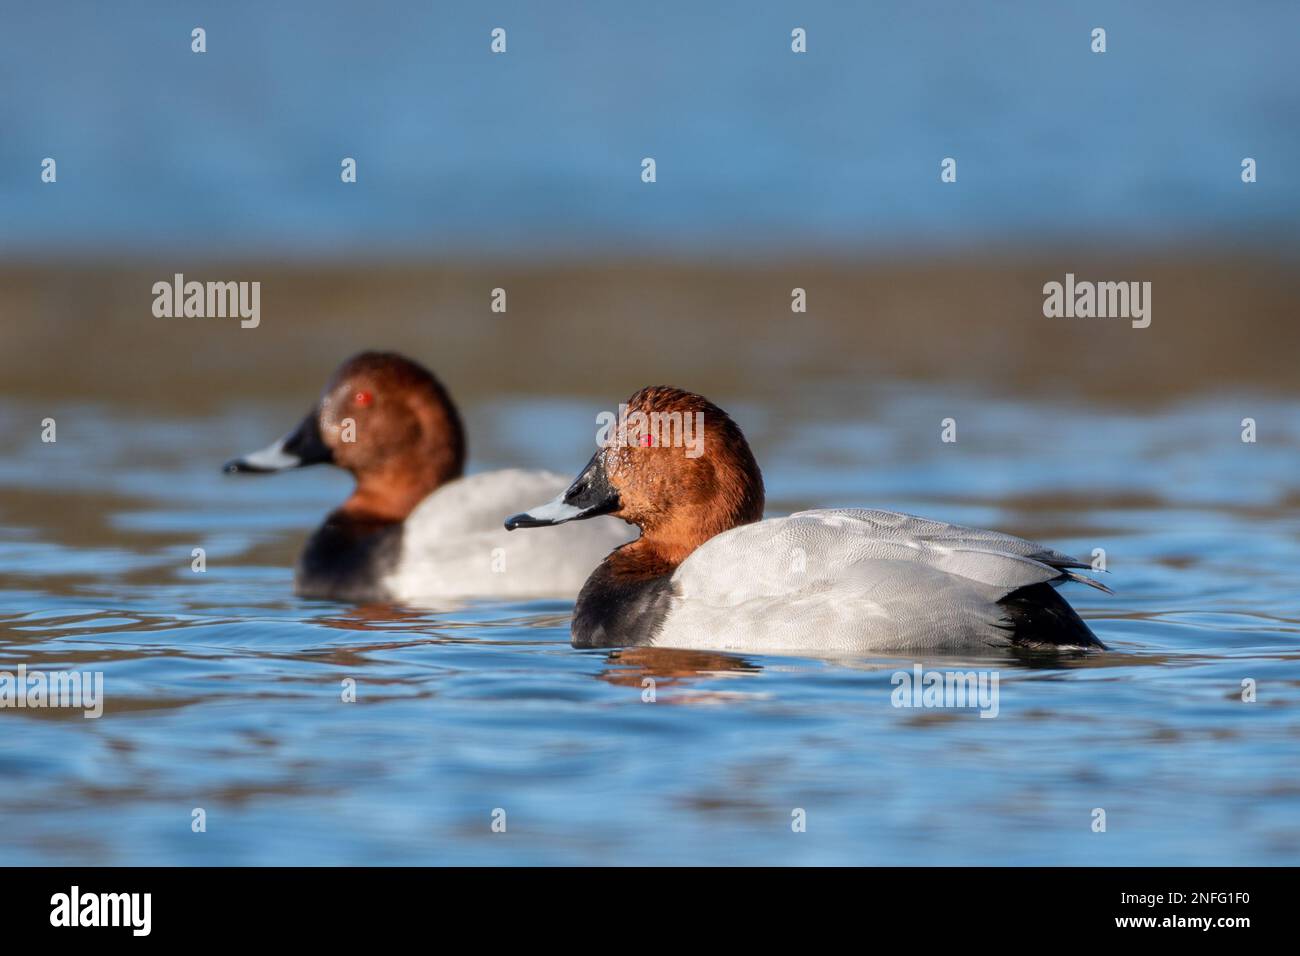 Common Pochard (Aythya Ferina) on water, a red listed bird species in the UK. Pair of males or drakes in breeding plumage Stock Photo